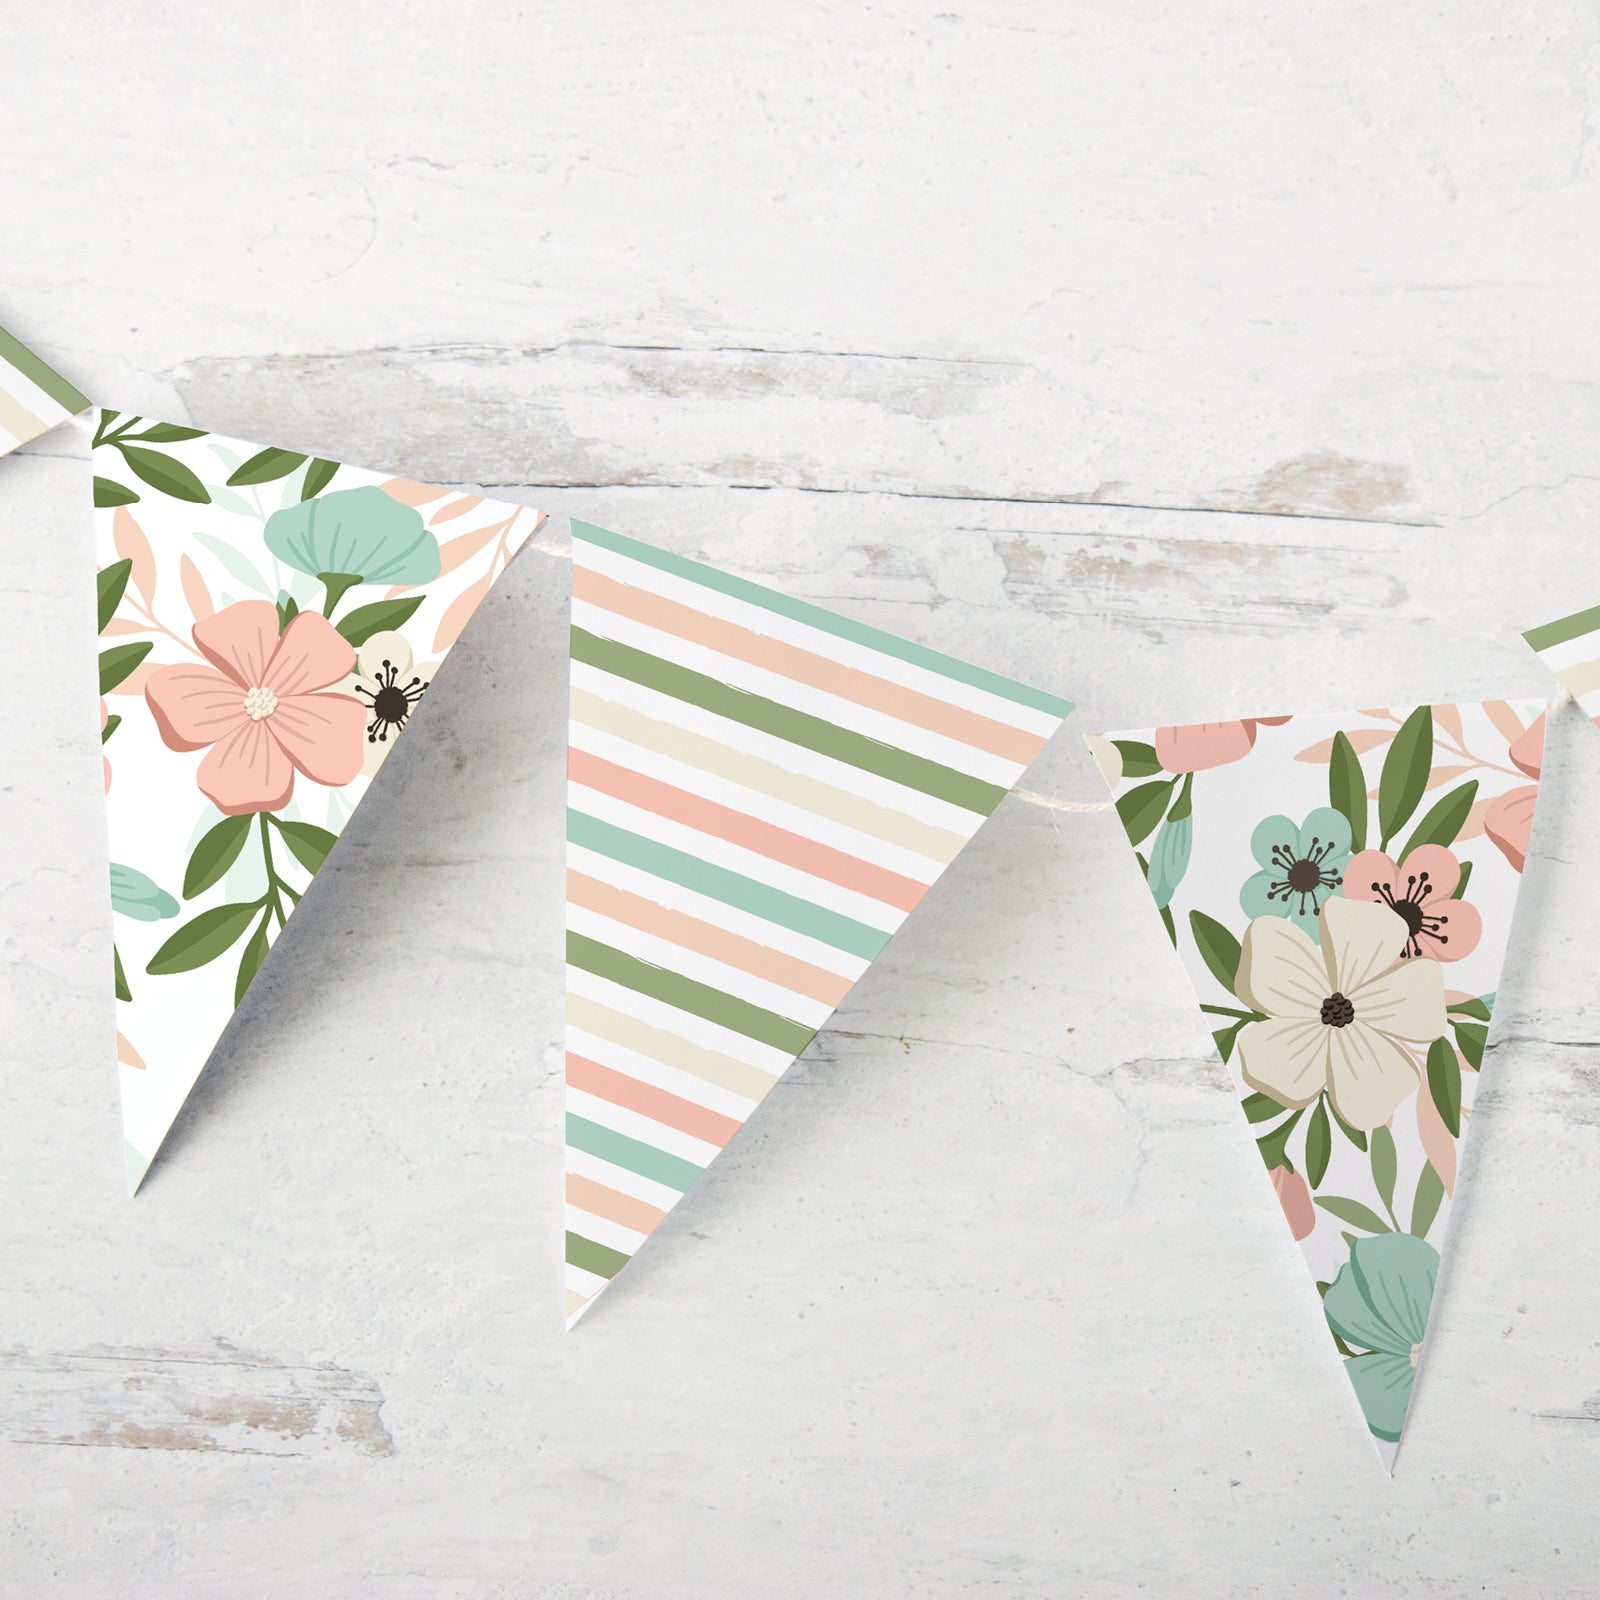 Spring Bunting - Flowers and Stripes